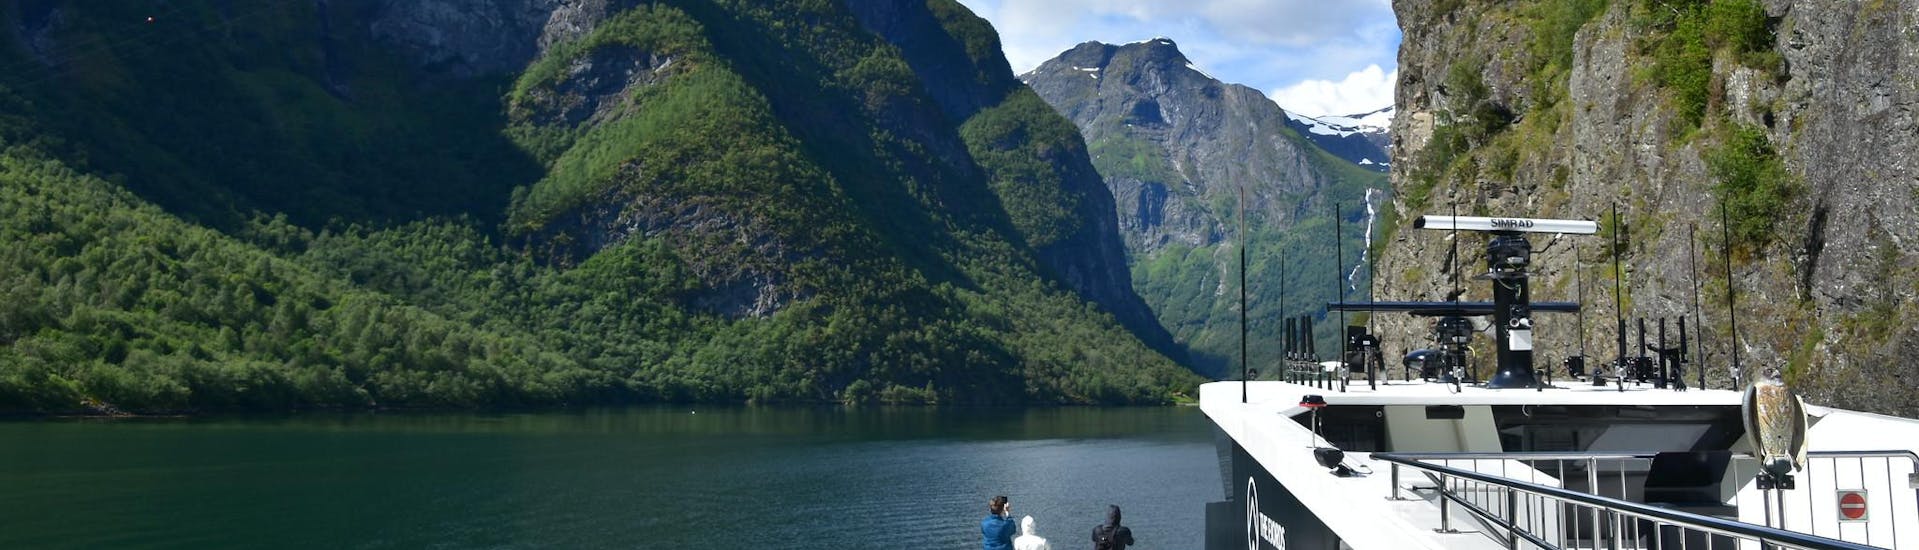 People visiting a fjord during a boat trip.